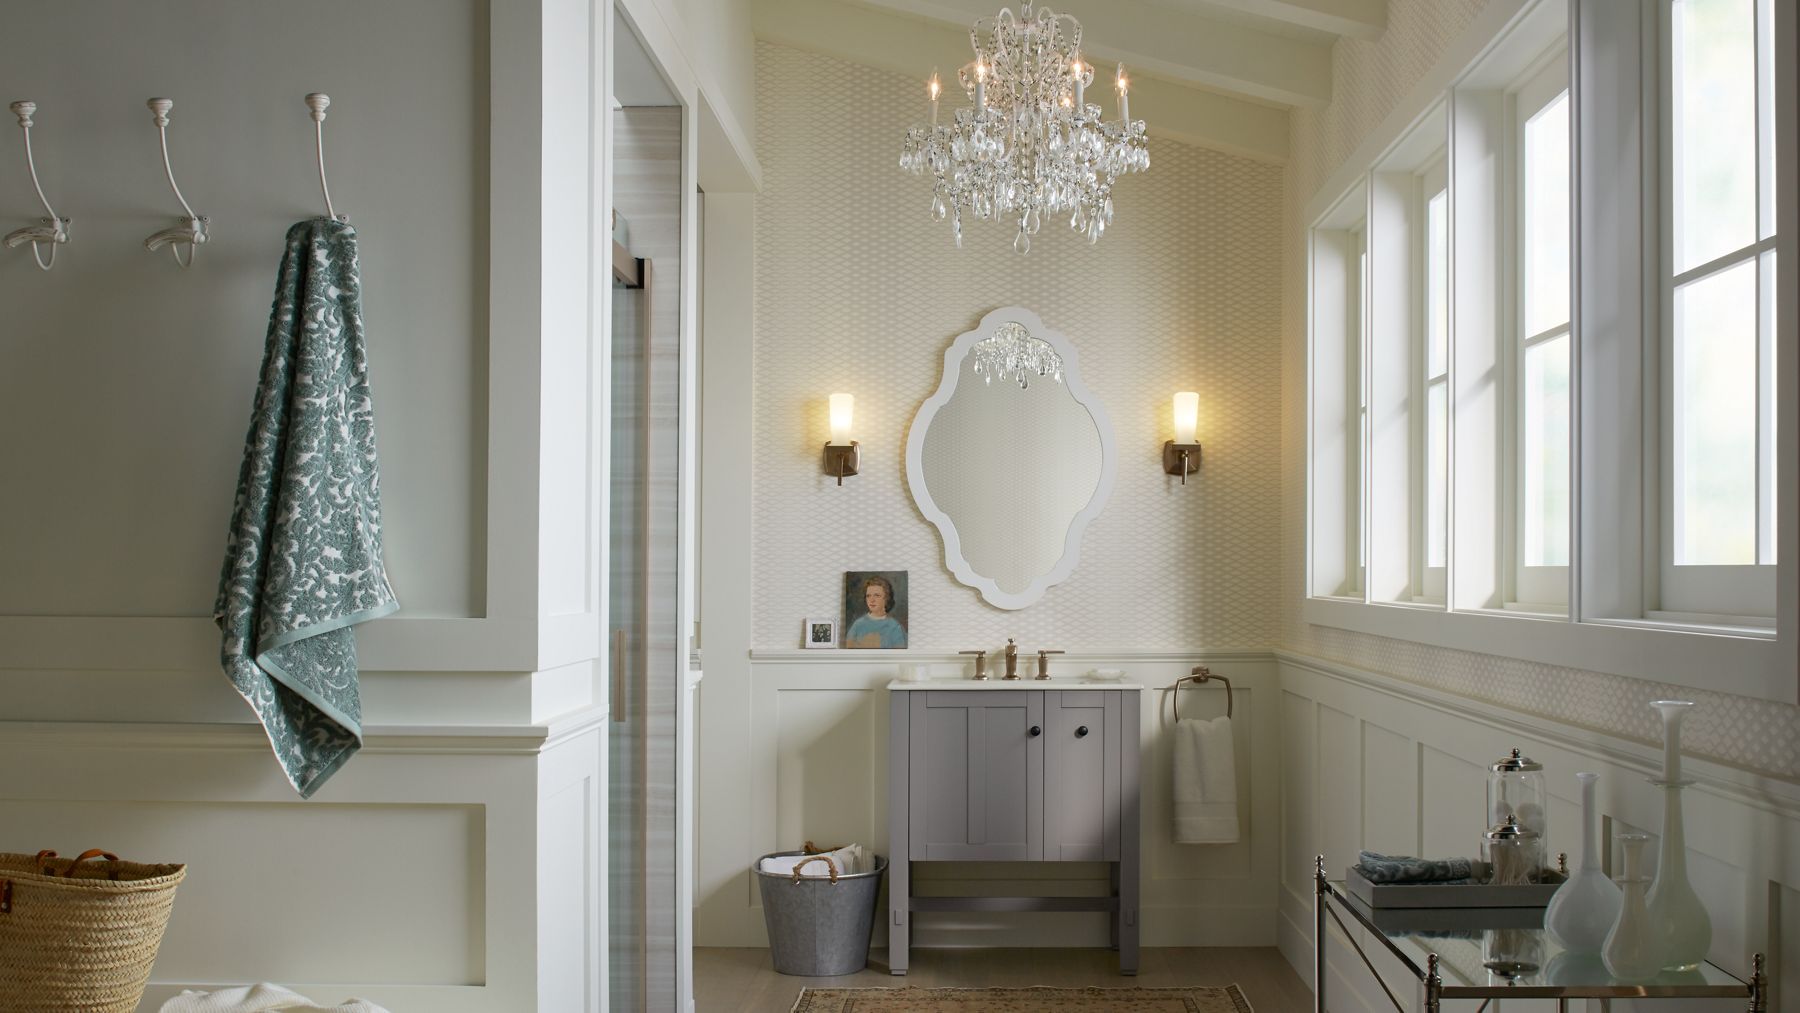 Traditional, coastal-themed bathroom with early American design